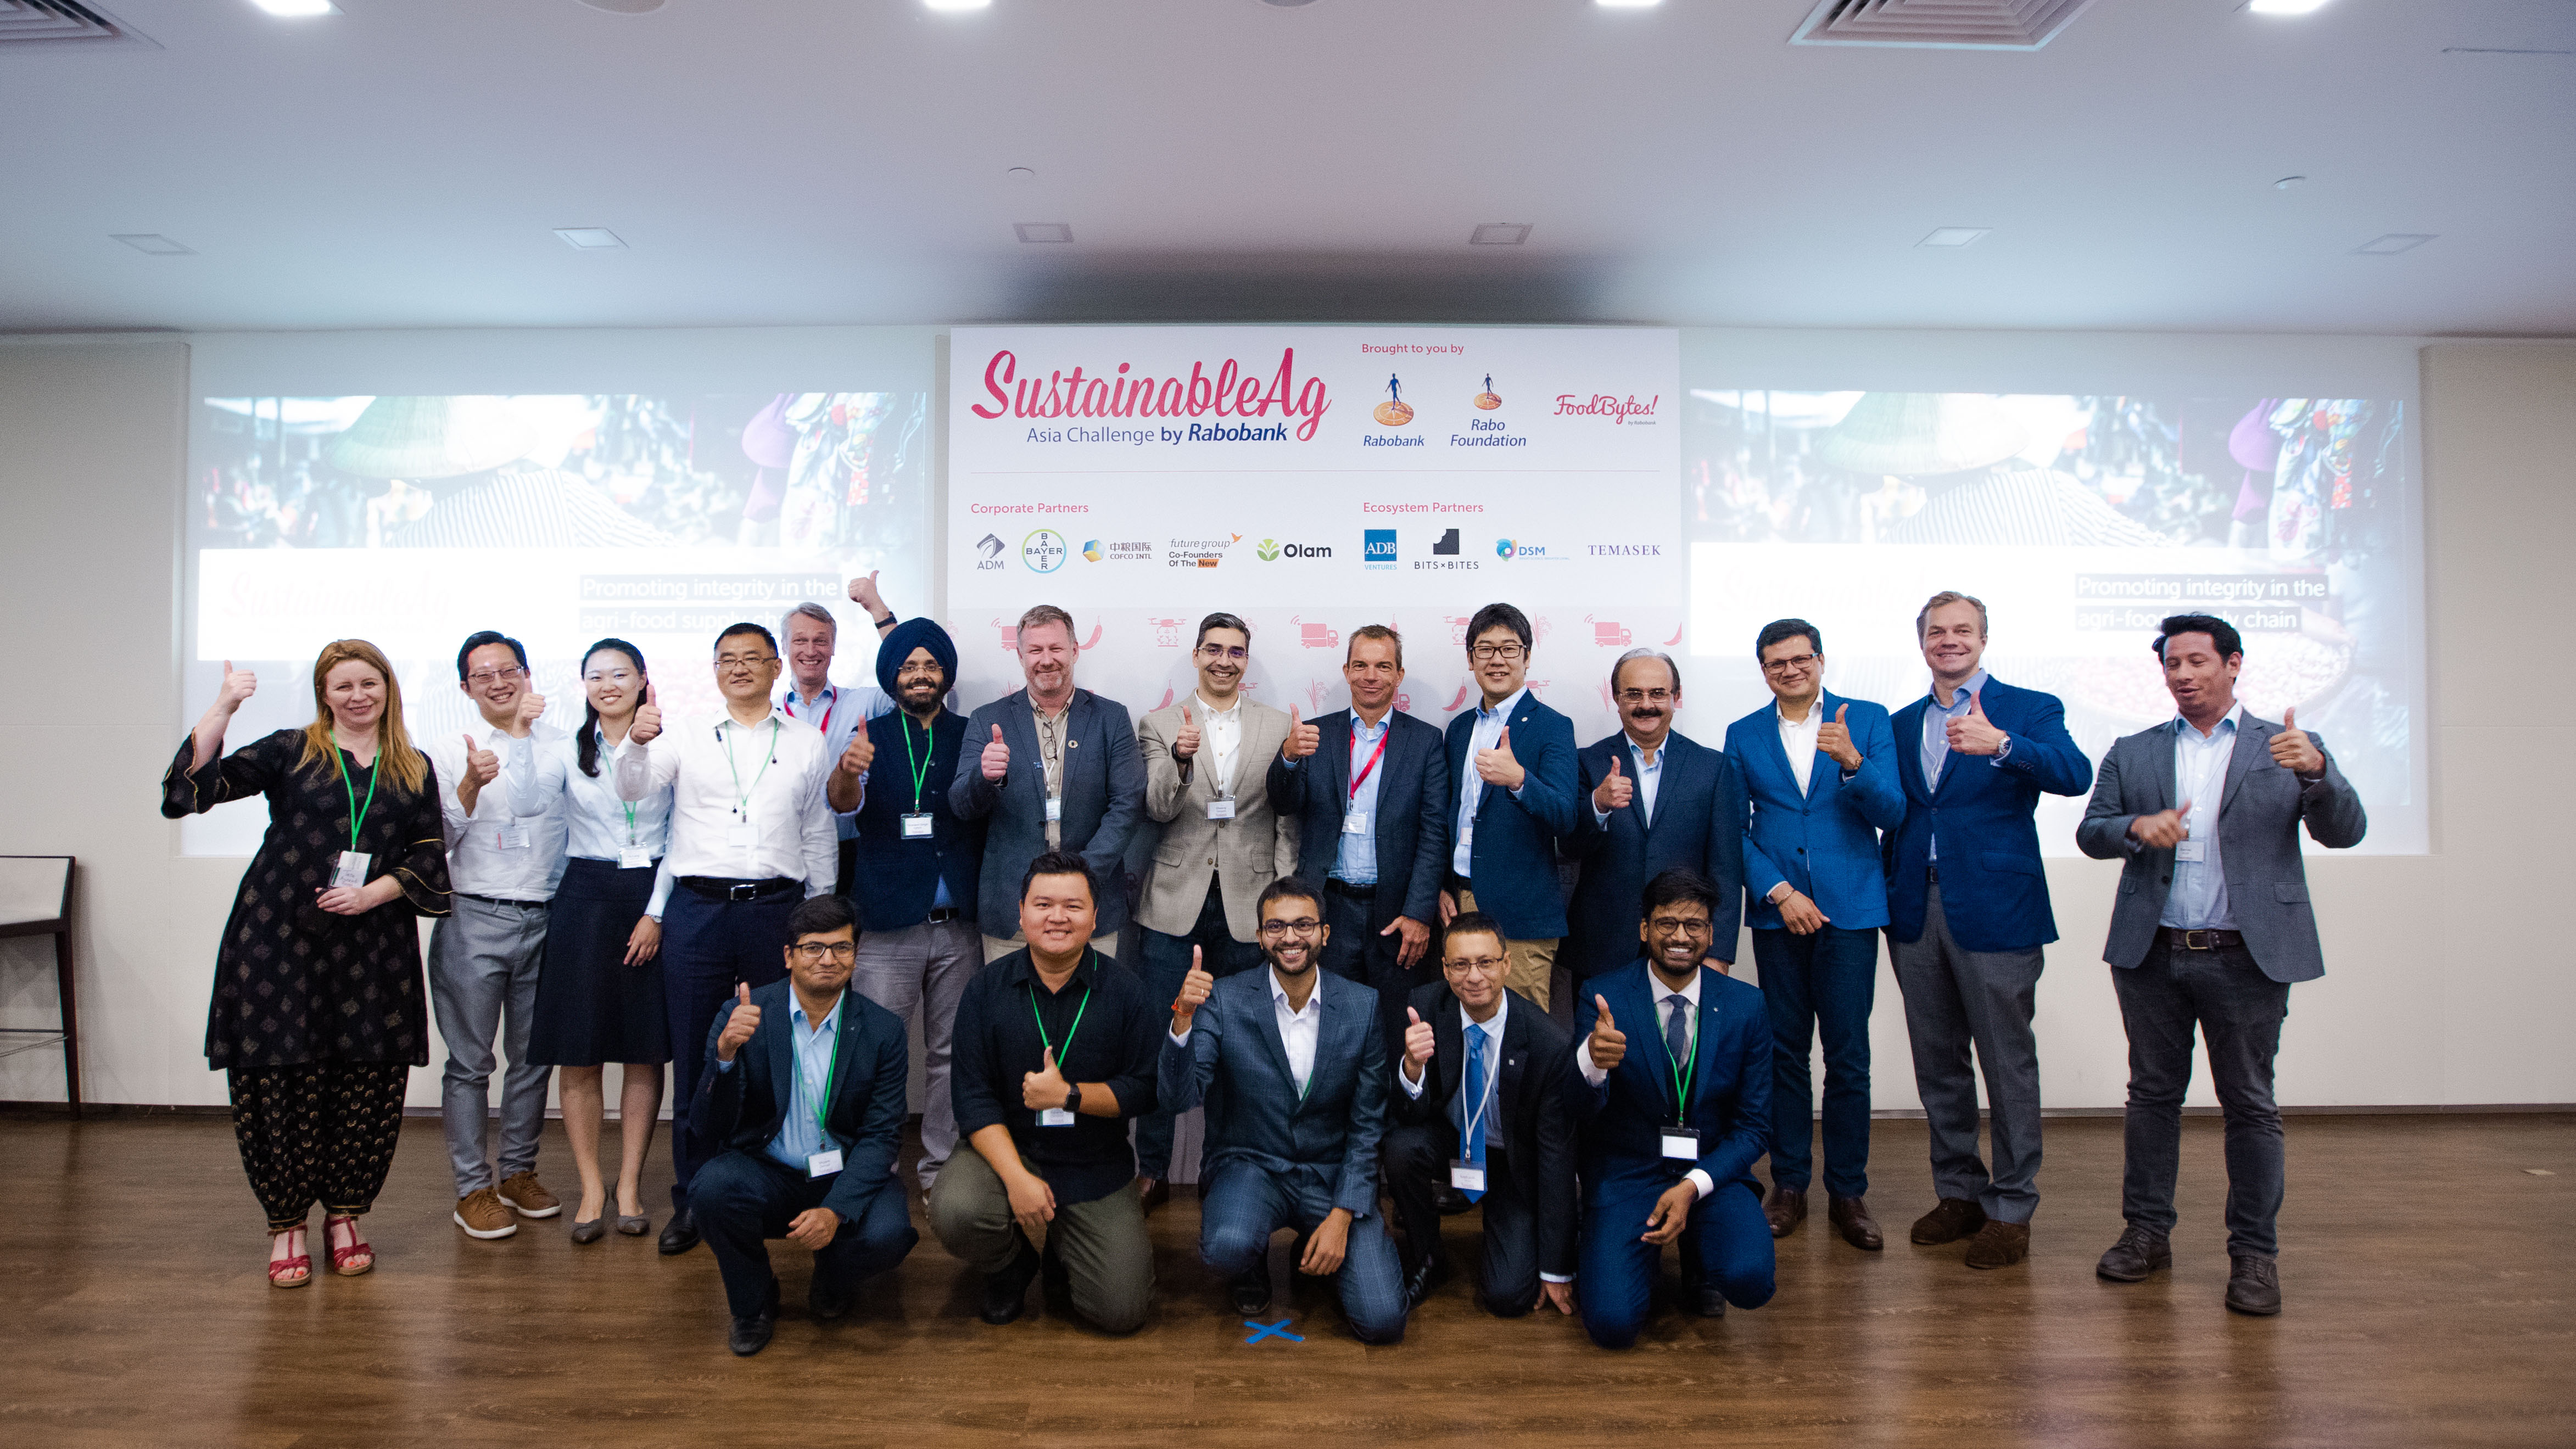 Rabobank concludes agritech challenge in Singapore, announces five winners